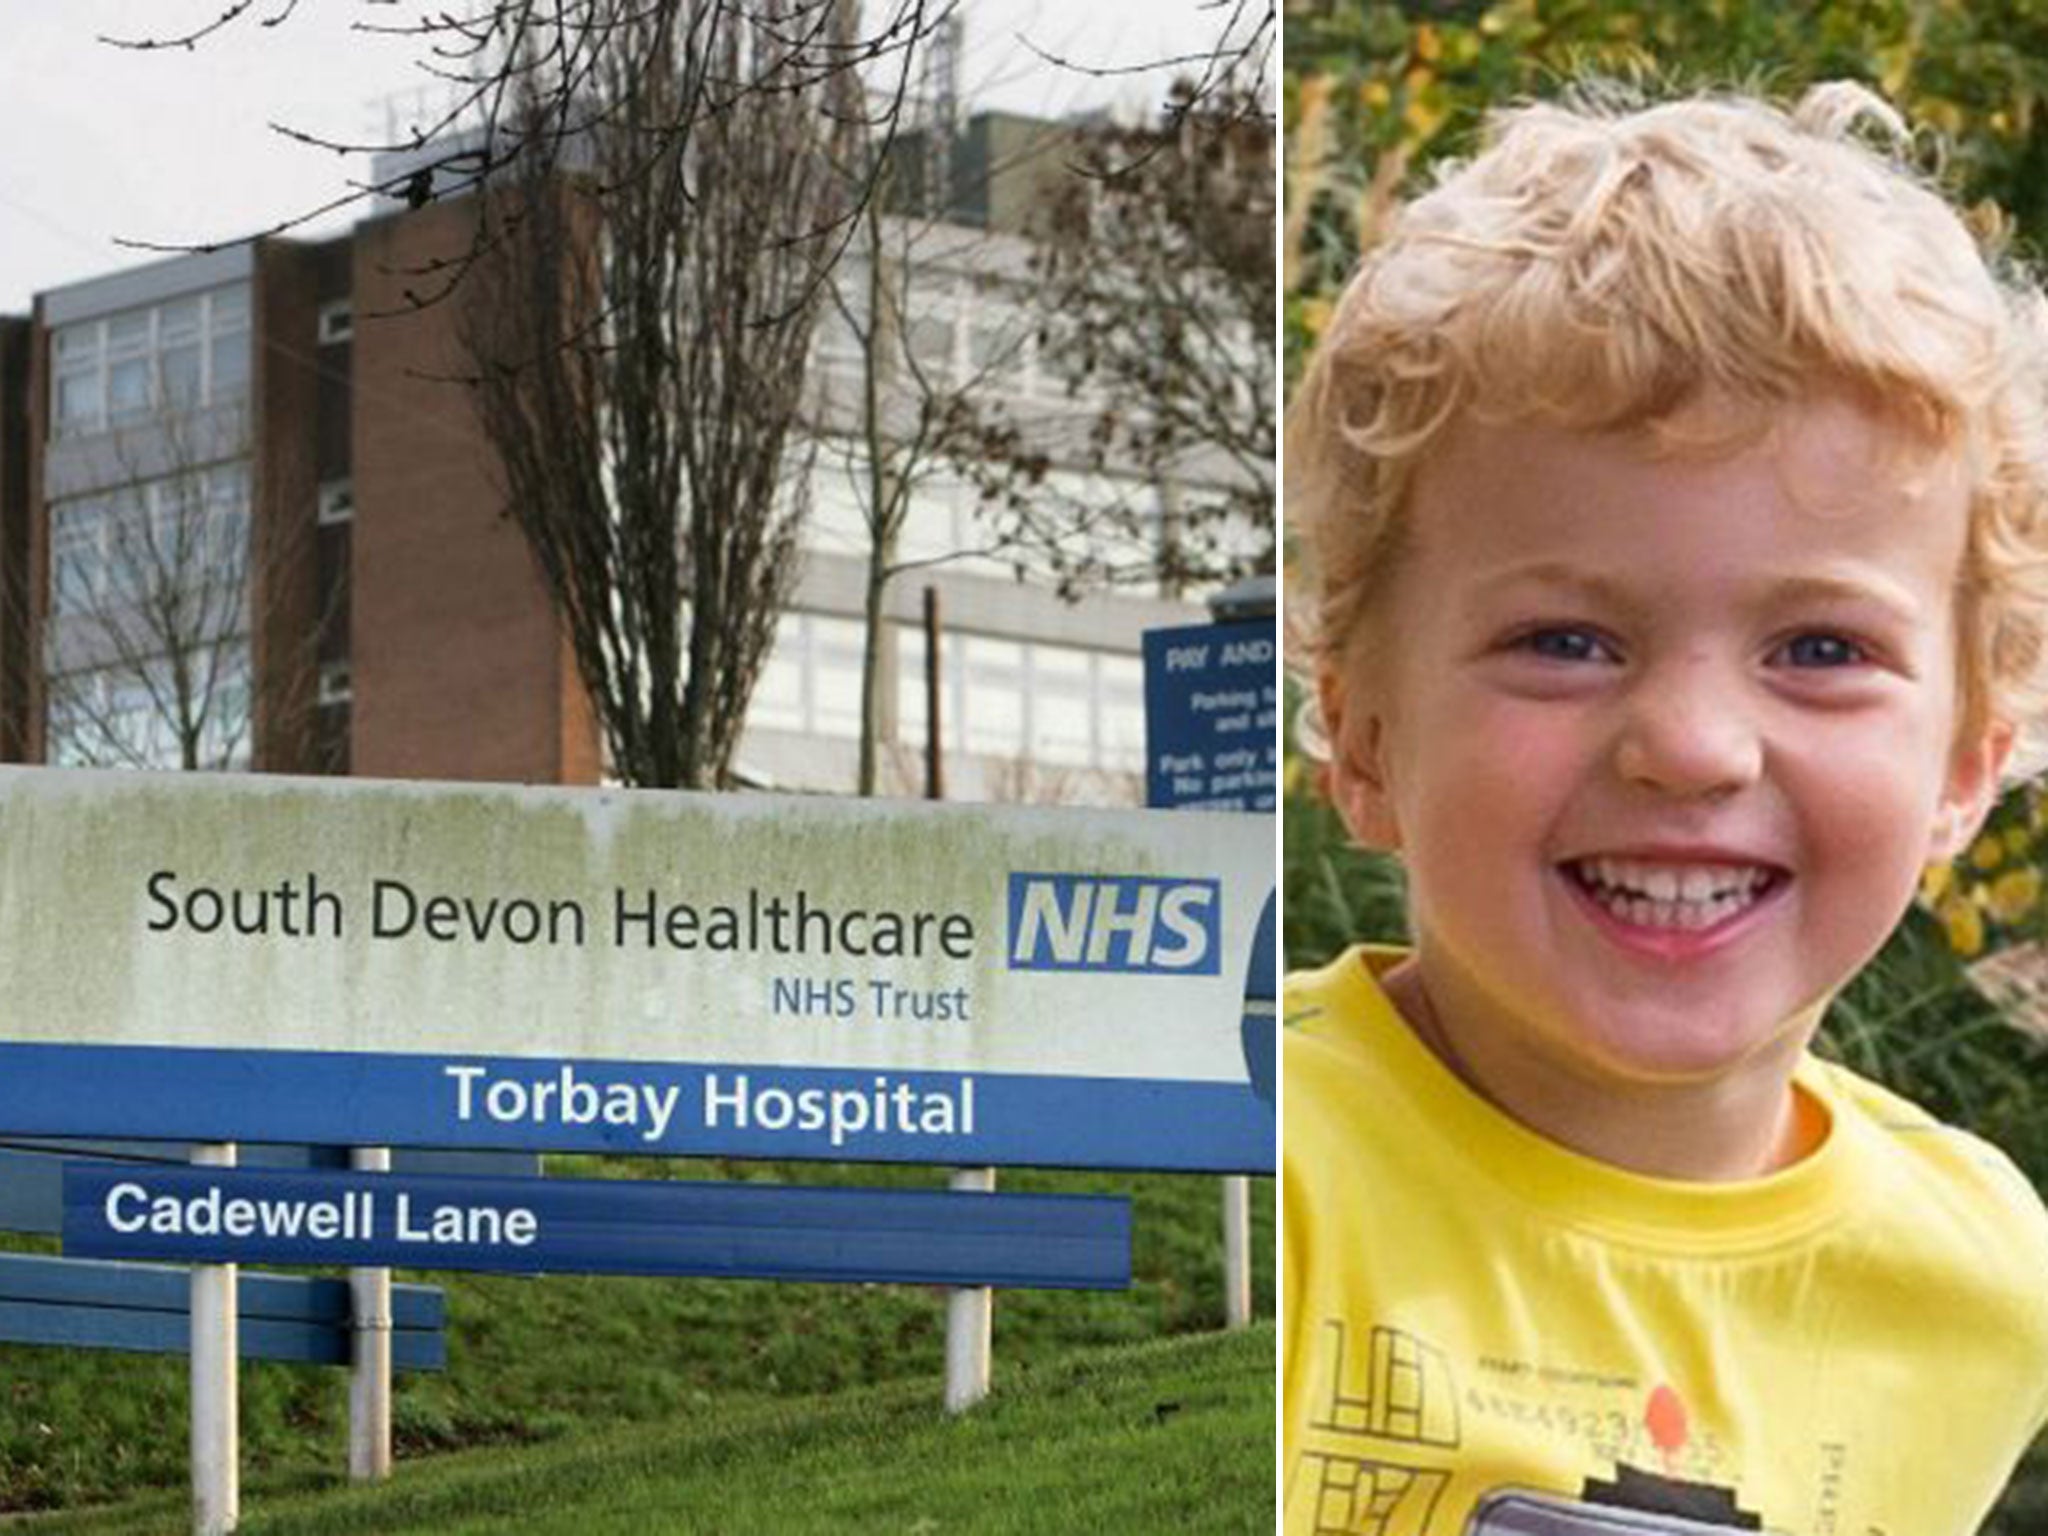 Sam Morrish was taken by ambulance to A&E at Torbay Hospital and prescribed with antibiotics